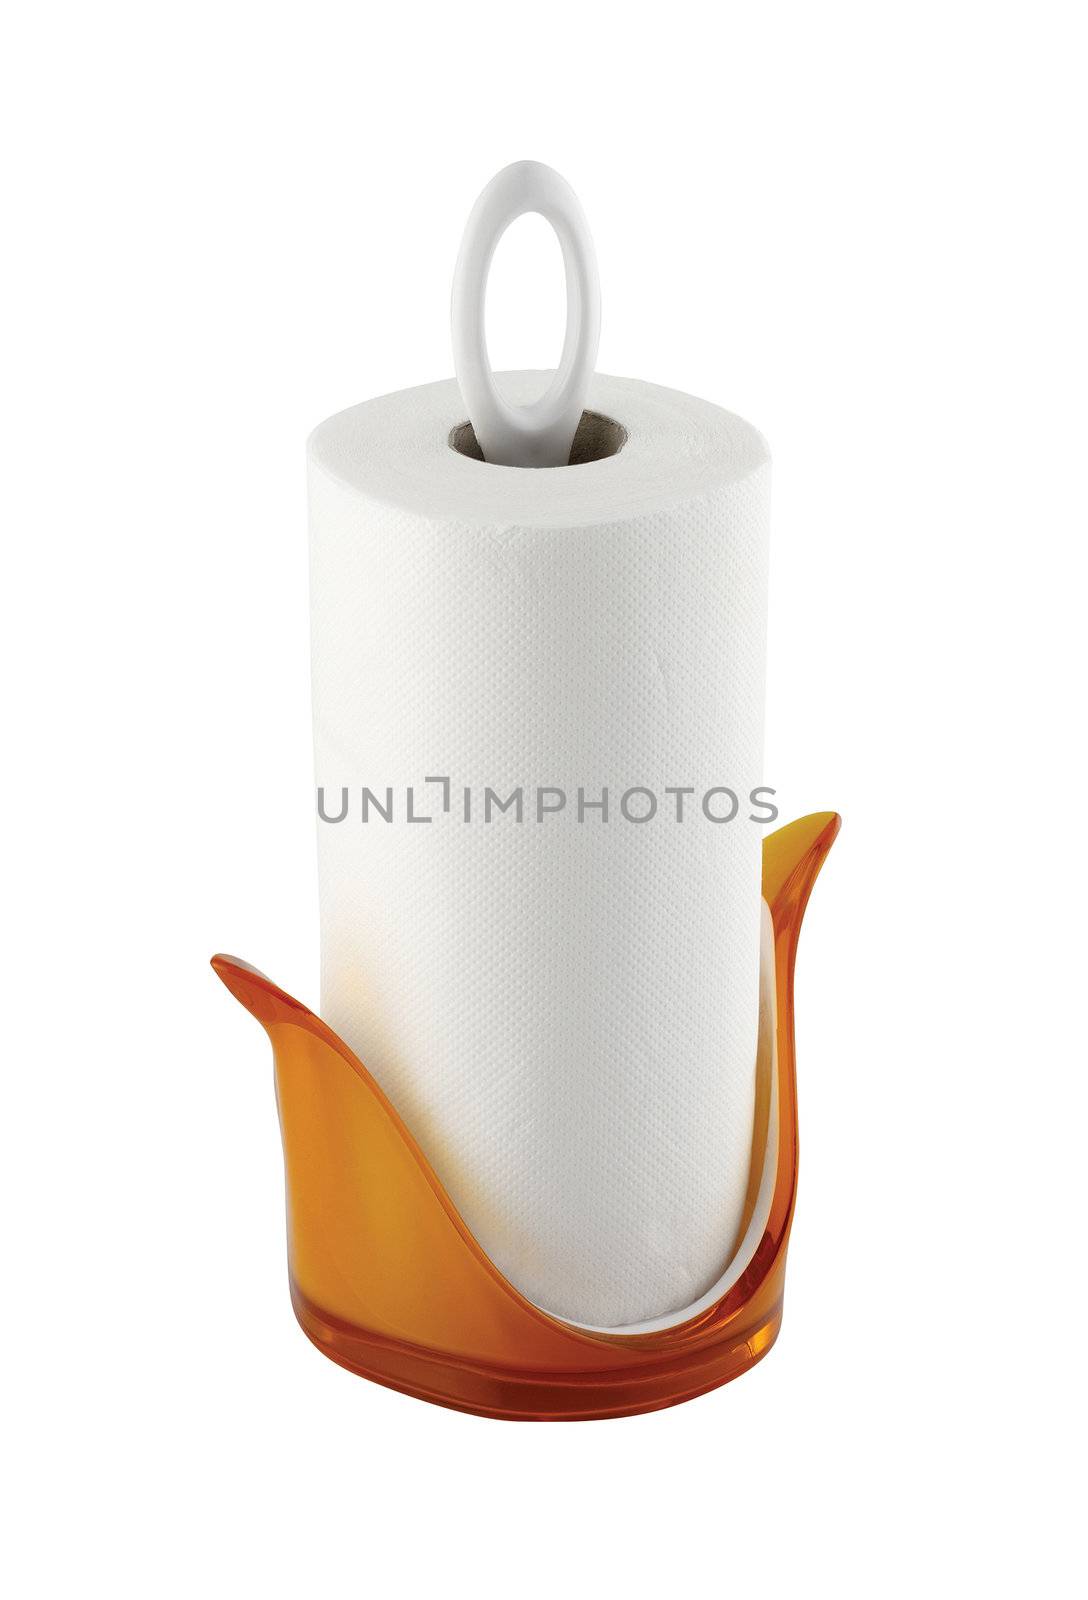 roll of paper towels, isolated on white background by stokkete